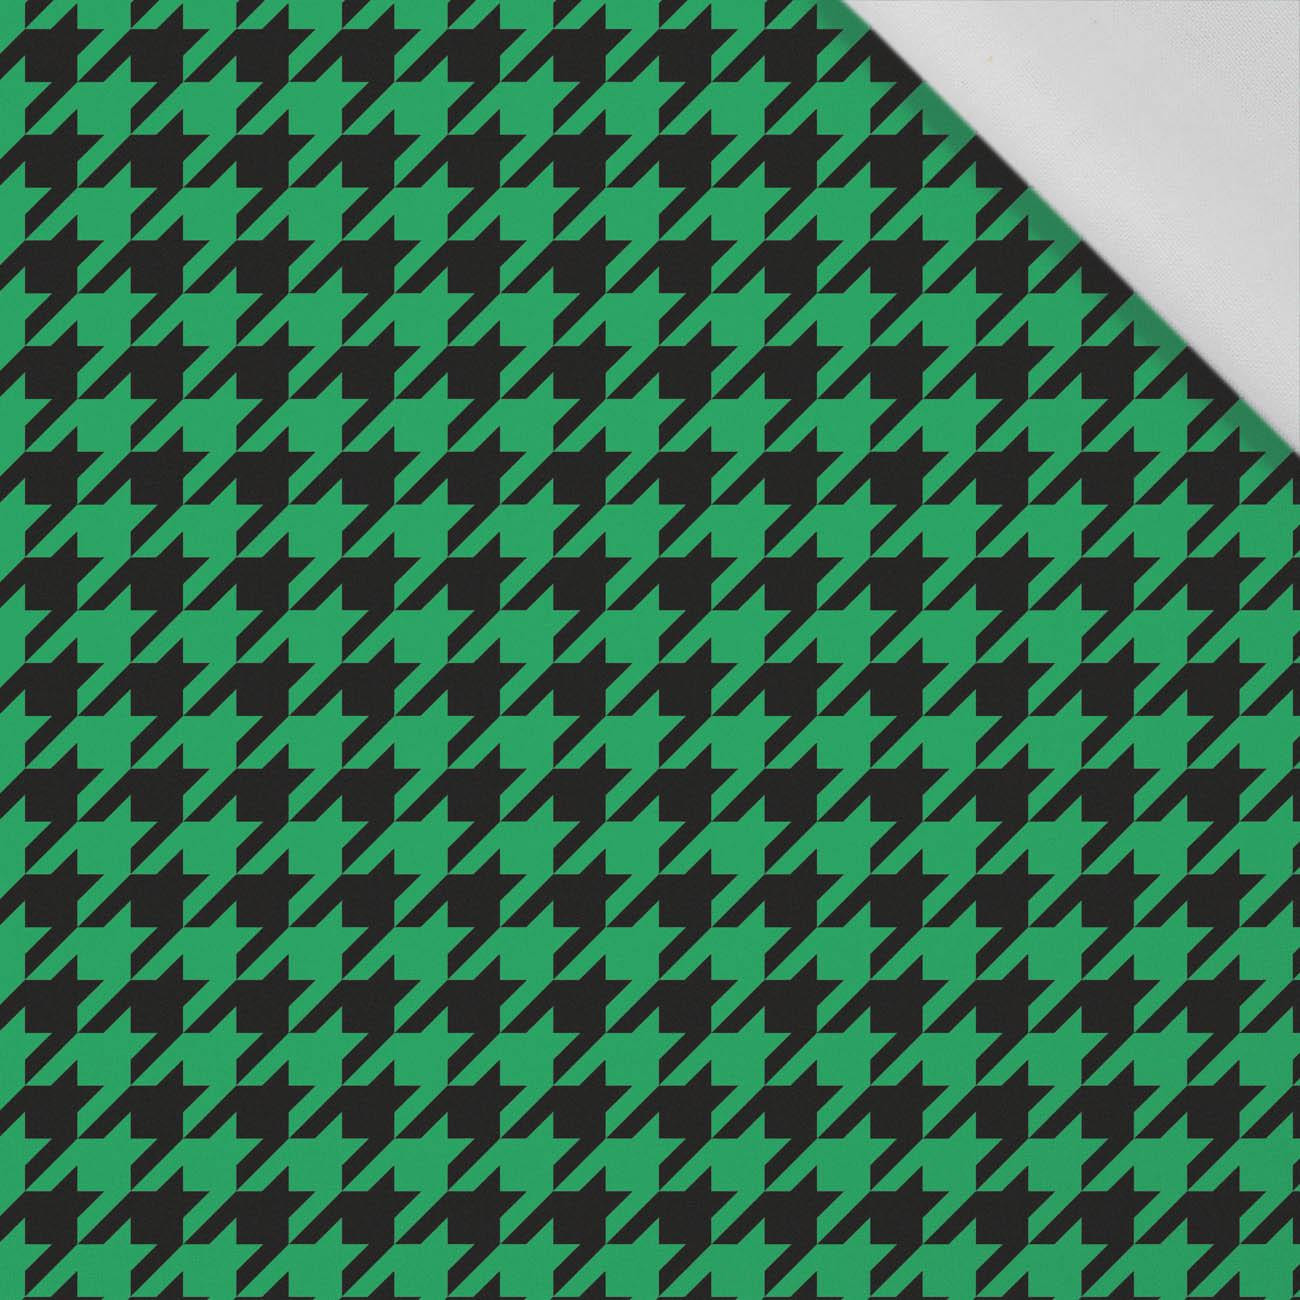 BLACK HOUNDSTOOTH / green - Cotton woven fabric